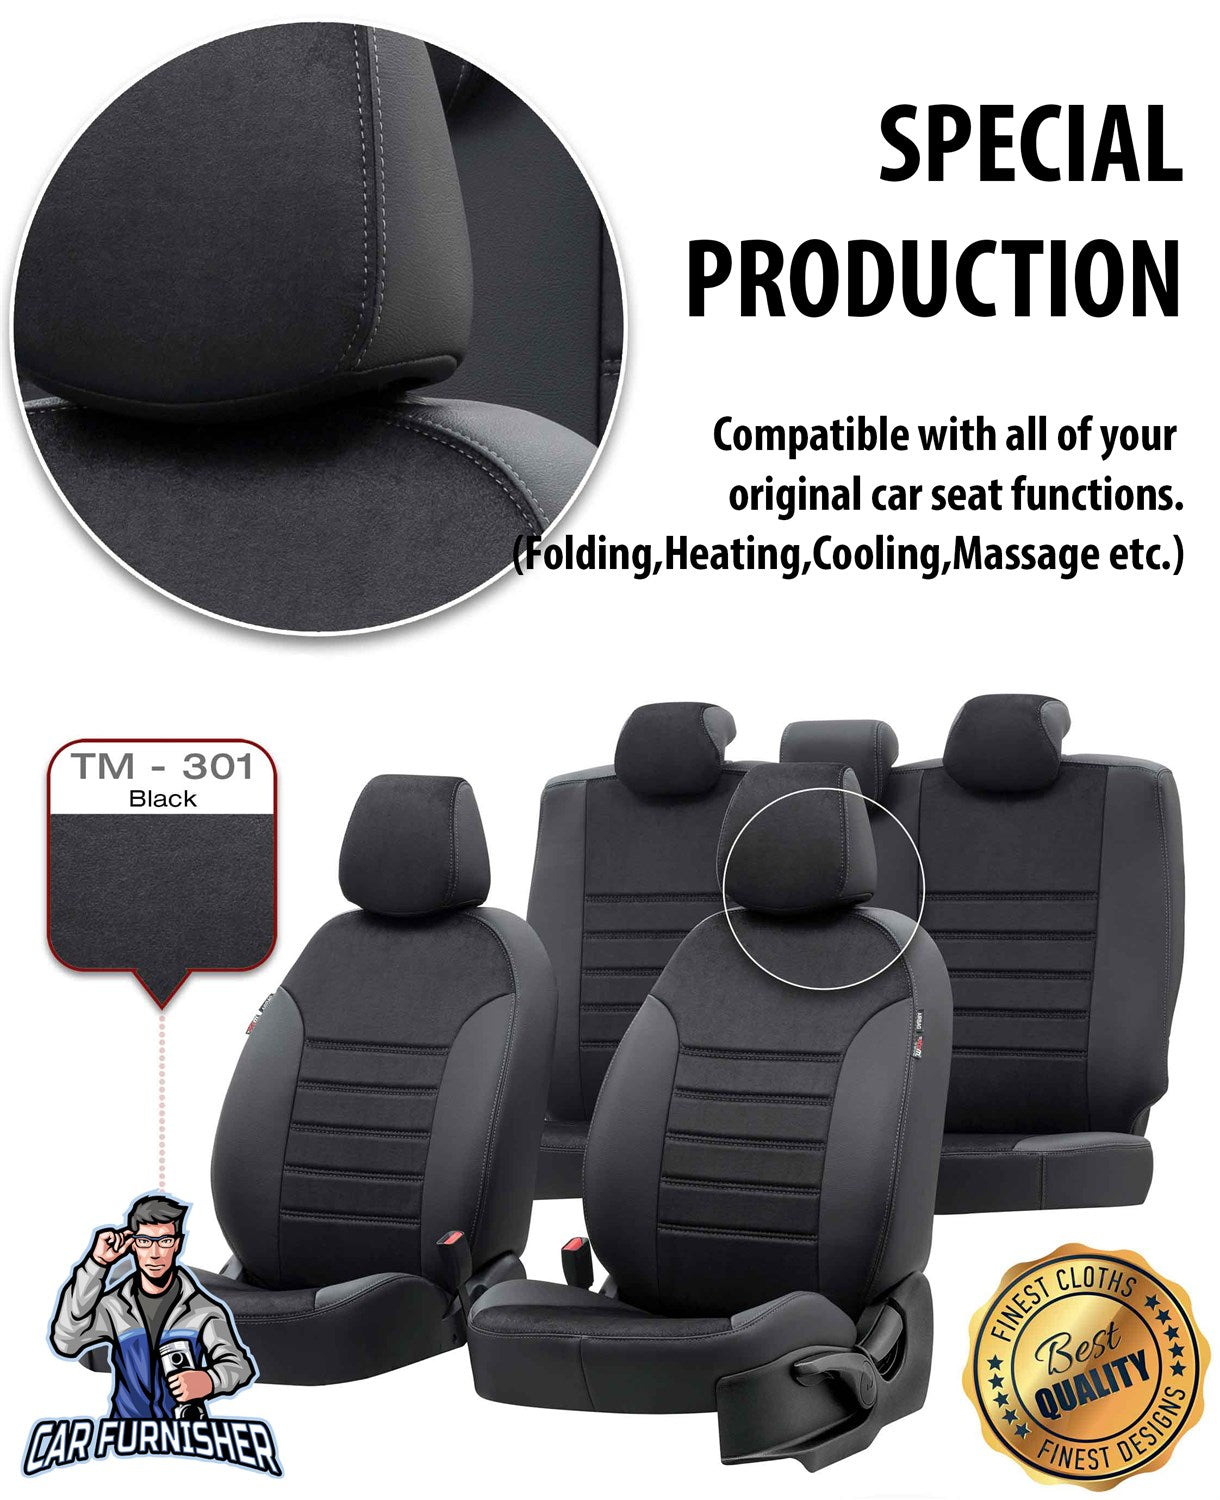 Mercedes CLK Seat Covers Milano Suede Design Smoked Black Leather & Suede Fabric